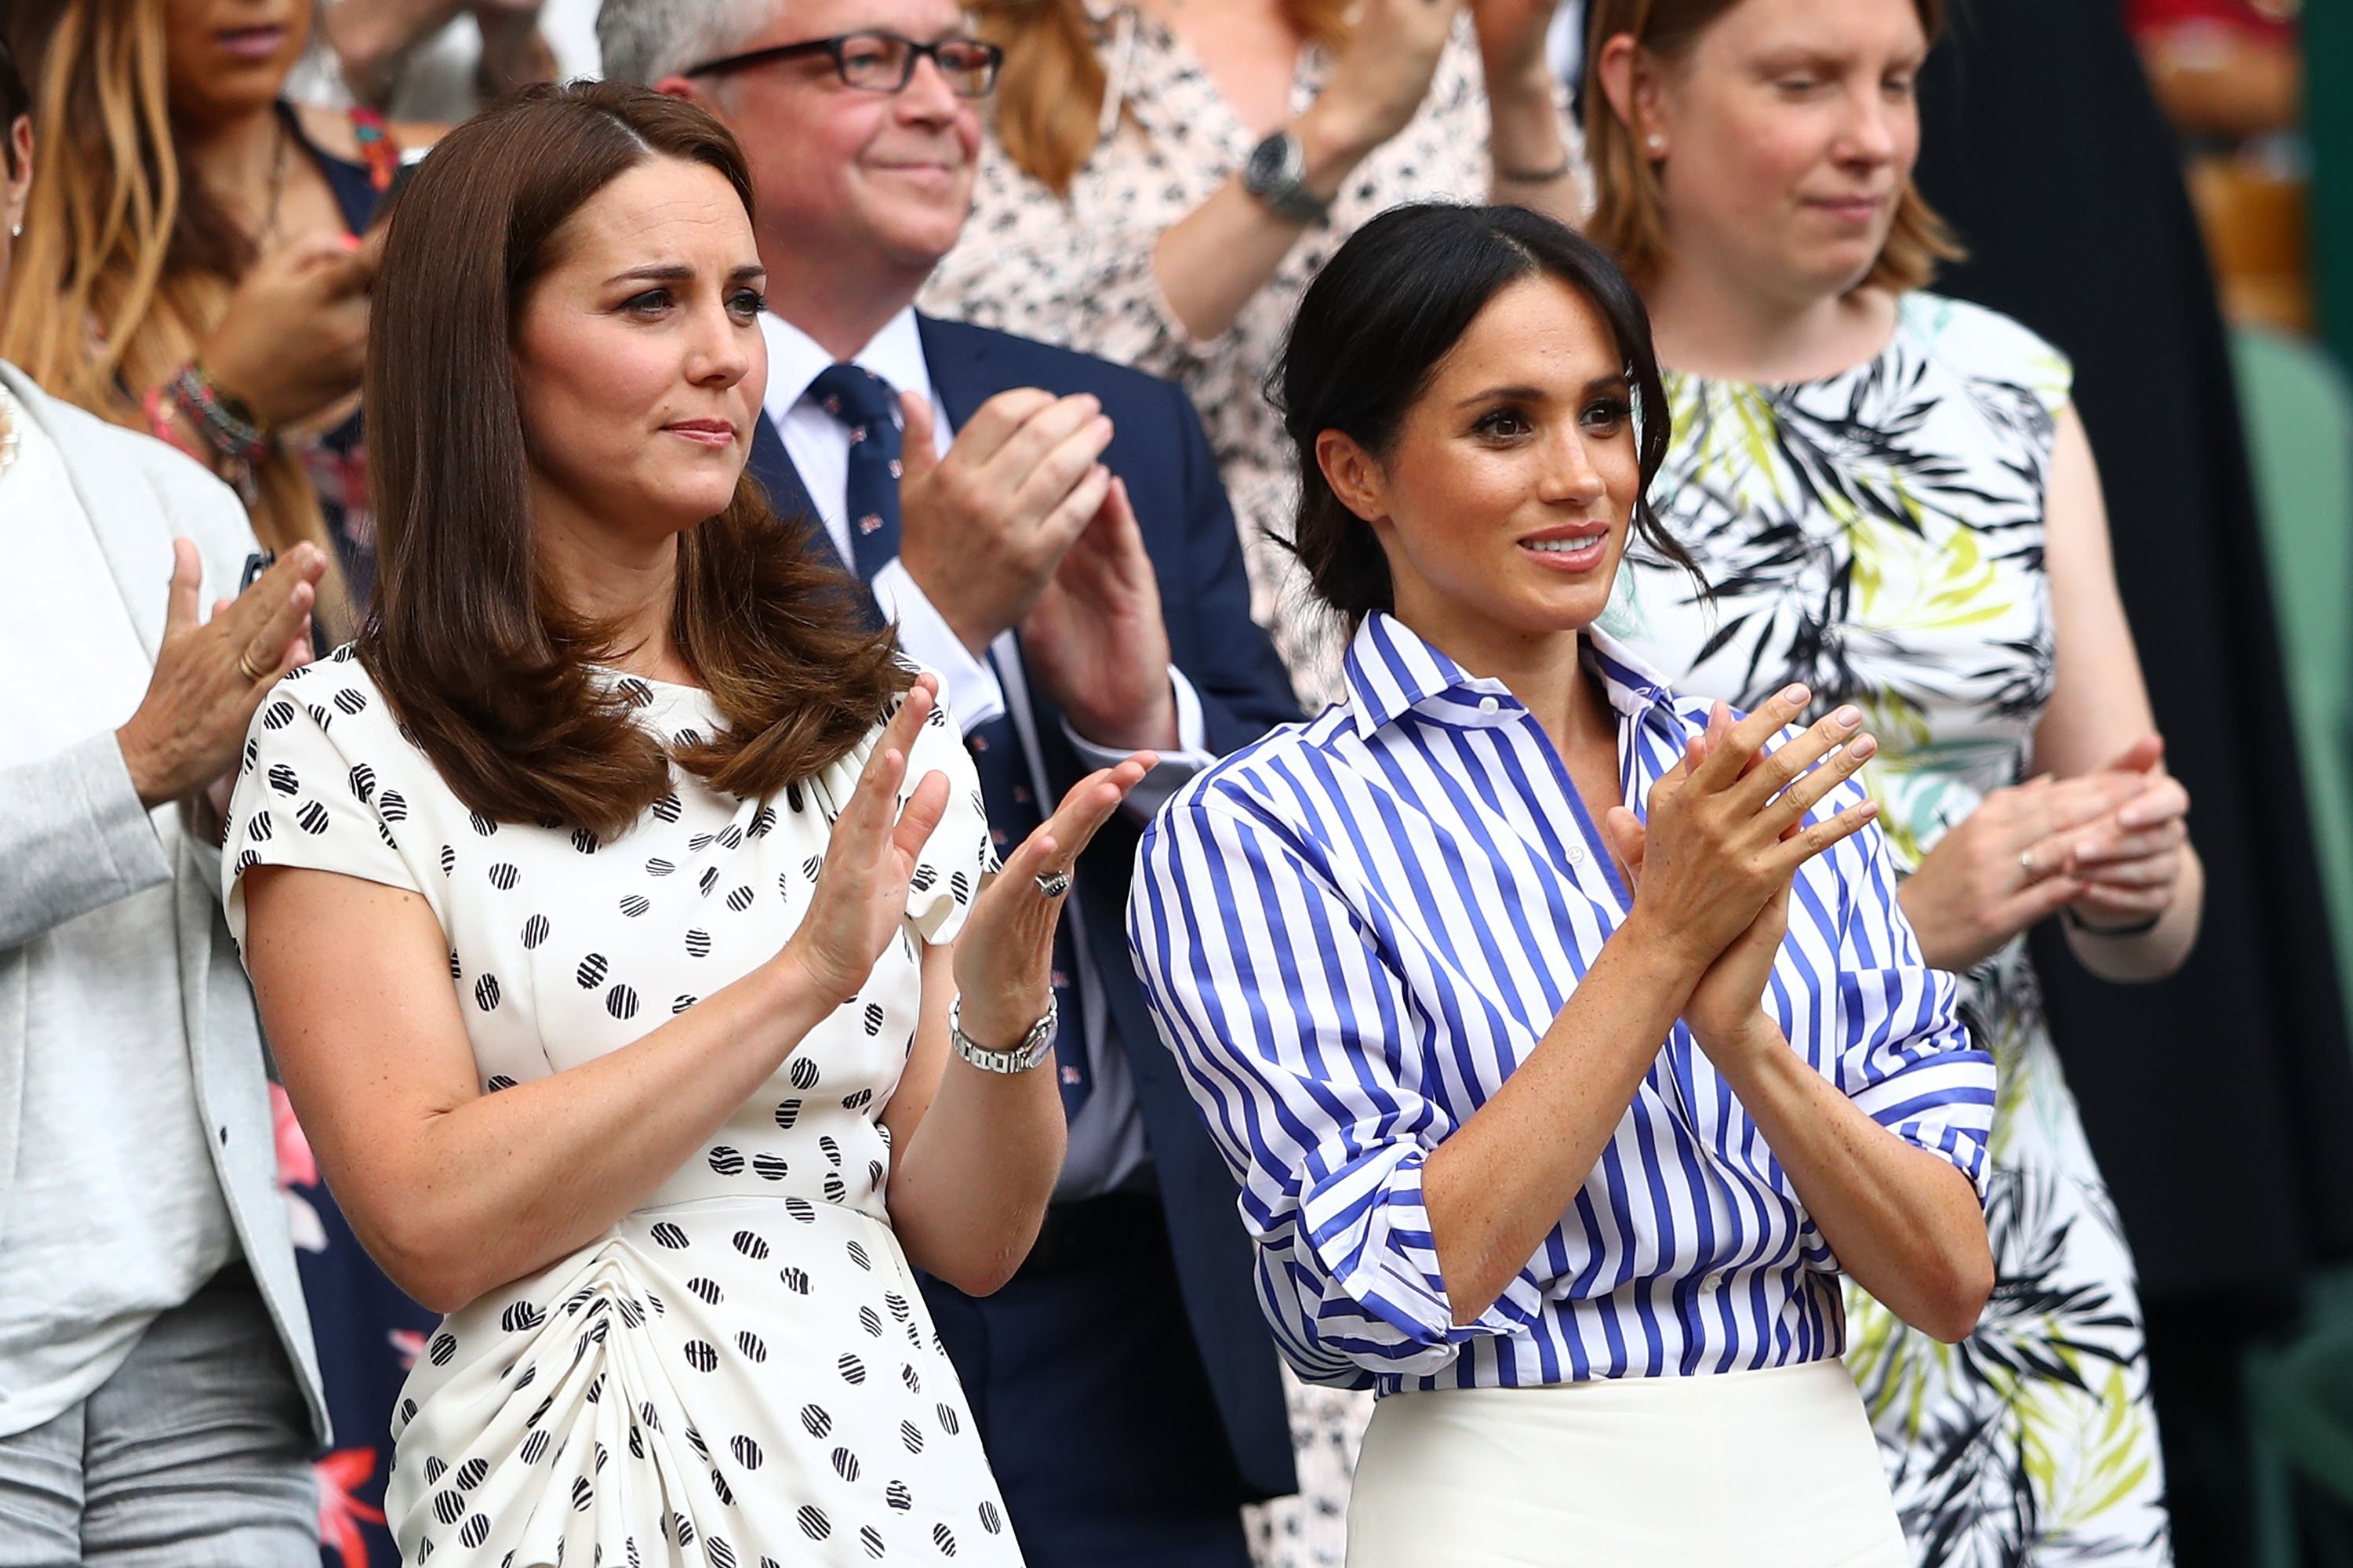 Kate Middleton and Meghan Markle applaud ahead of the Ladies' Singles final match on day twelve of the Wimbledon Lawn Tennis Championships at All England Lawn Tennis and Croquet Club on July 14, 2018 | Photo: Getty Images